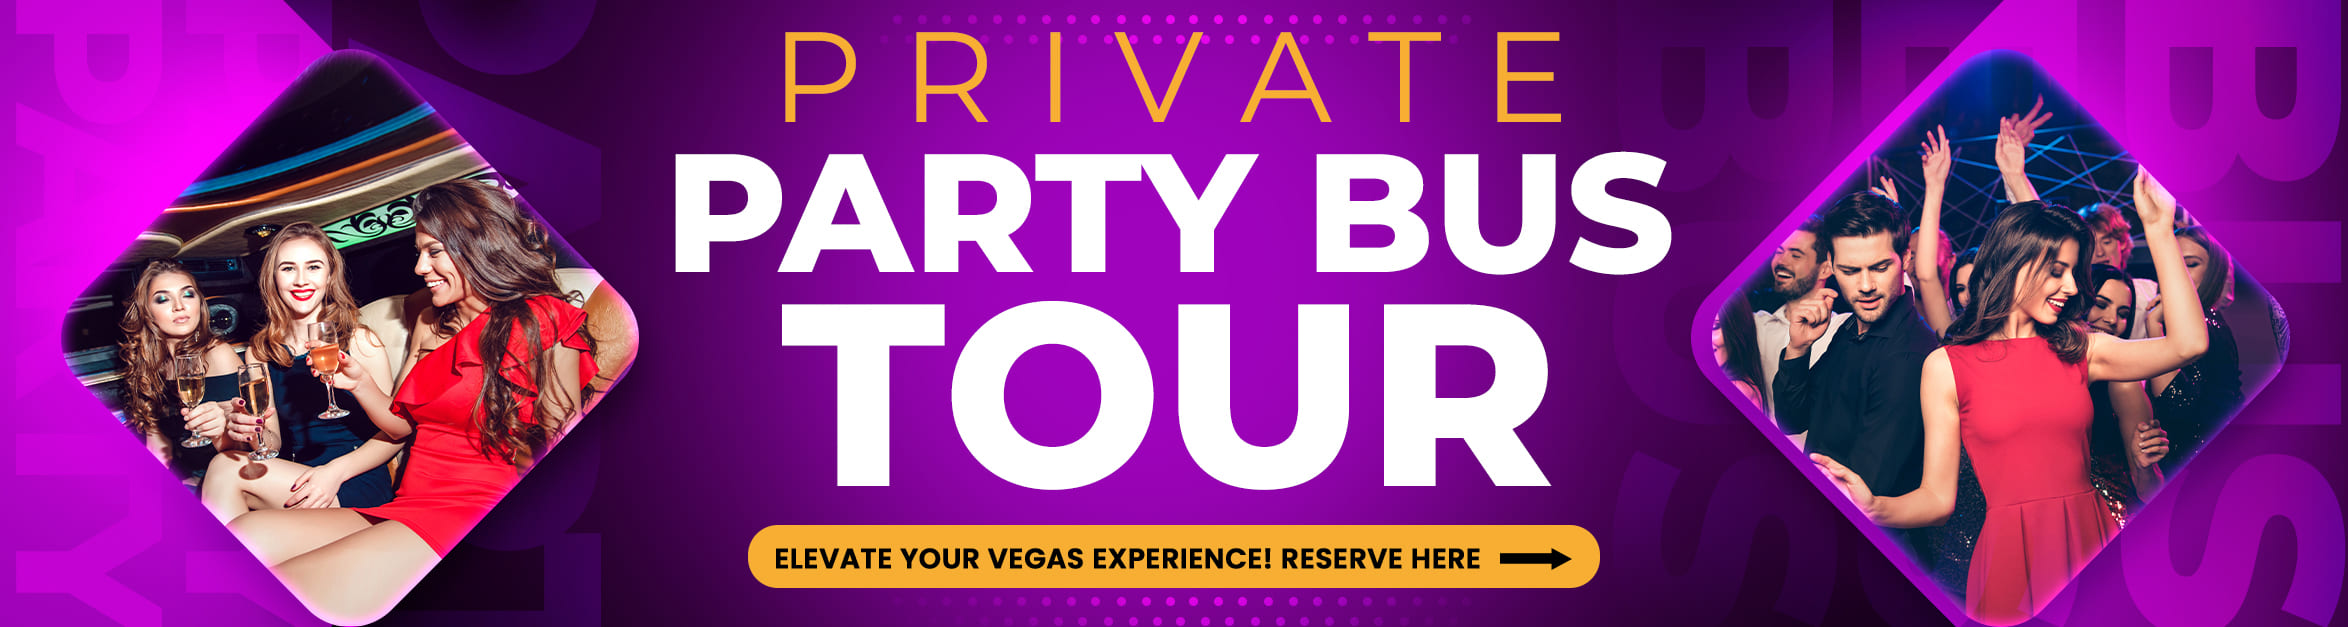 Joyful party-goers enjoying a luxurious private party bus tour in Las Vegas, celebrating with drinks and dancing under vibrant lights.